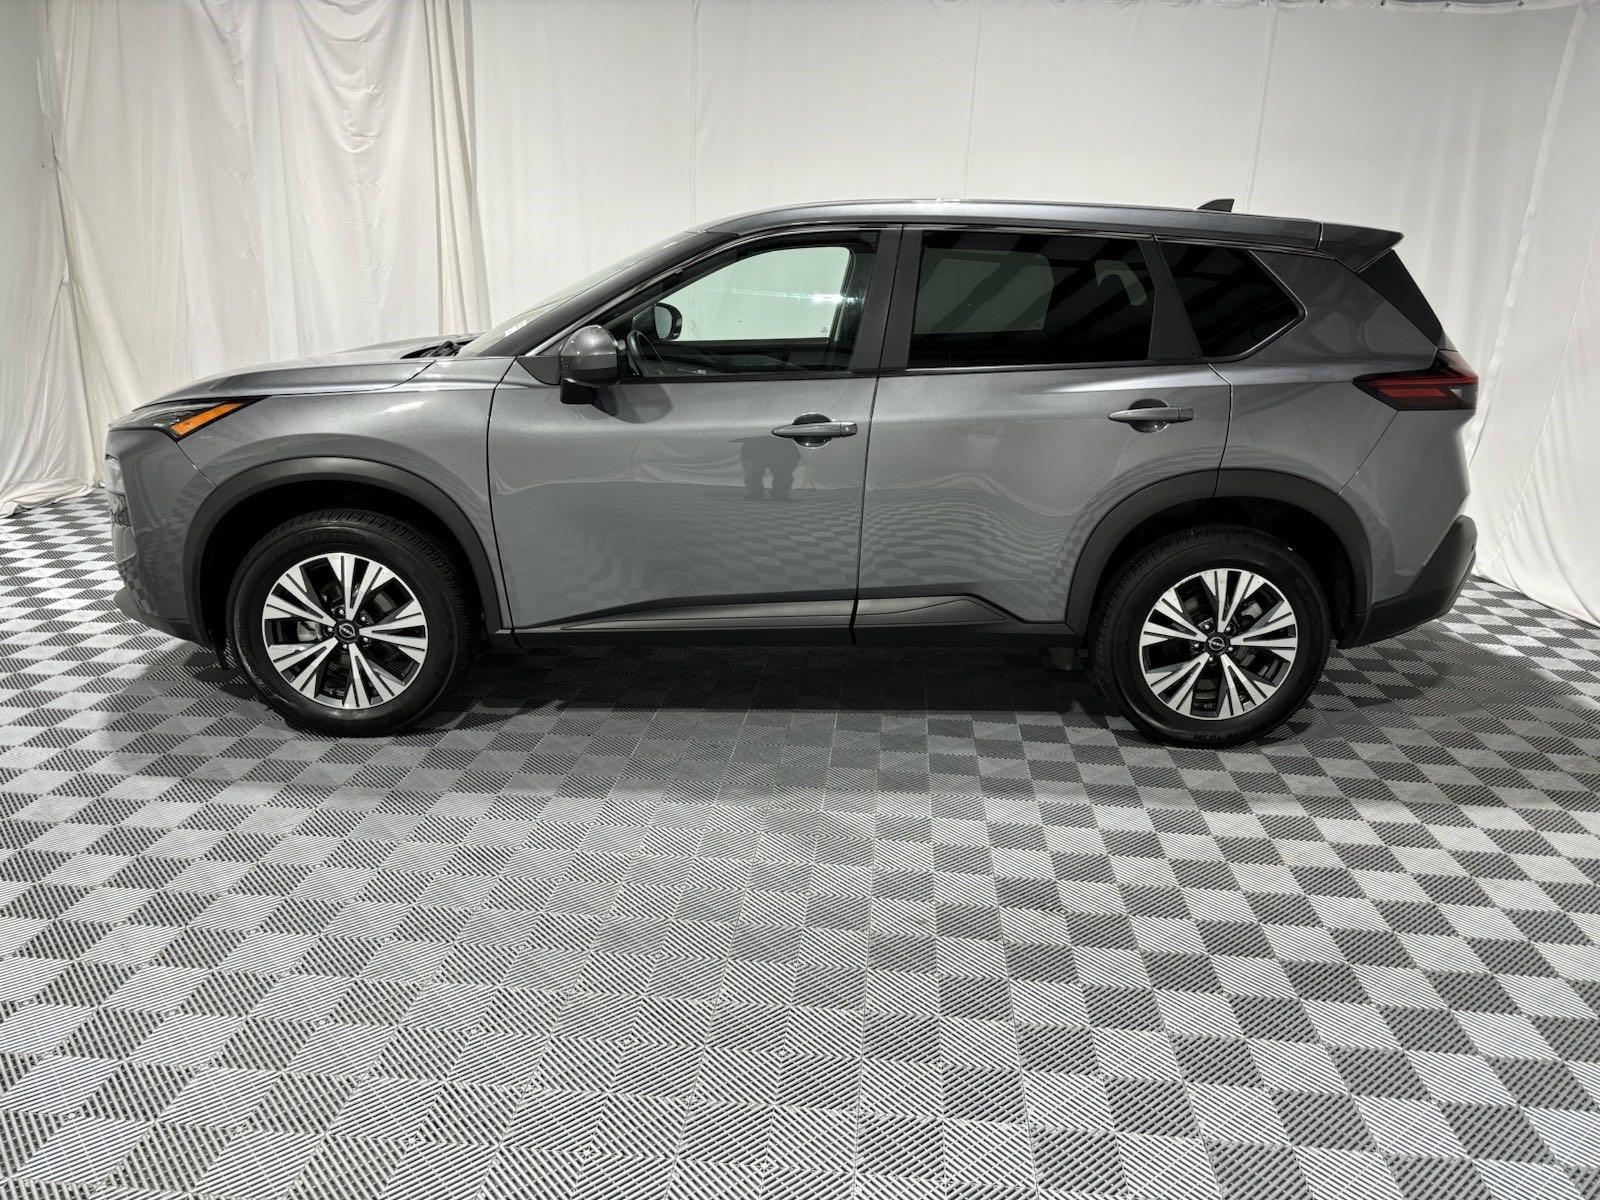 Used 2023 Nissan Rogue SV SUV for sale in St Joseph MO